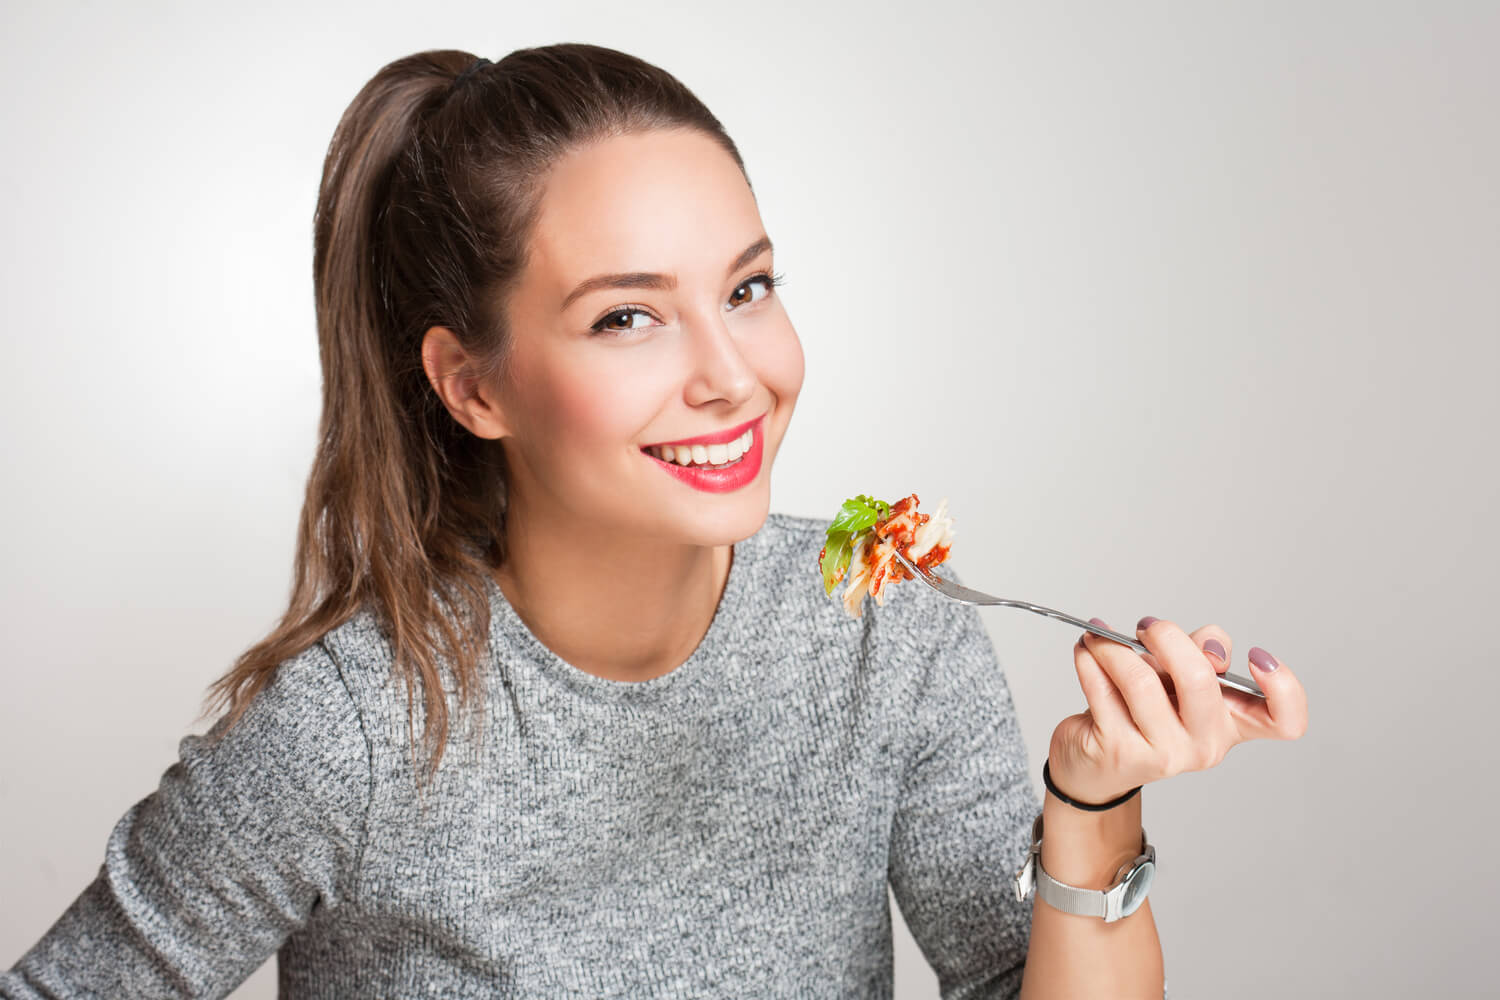 women eating vegetable- lifestyle and diet